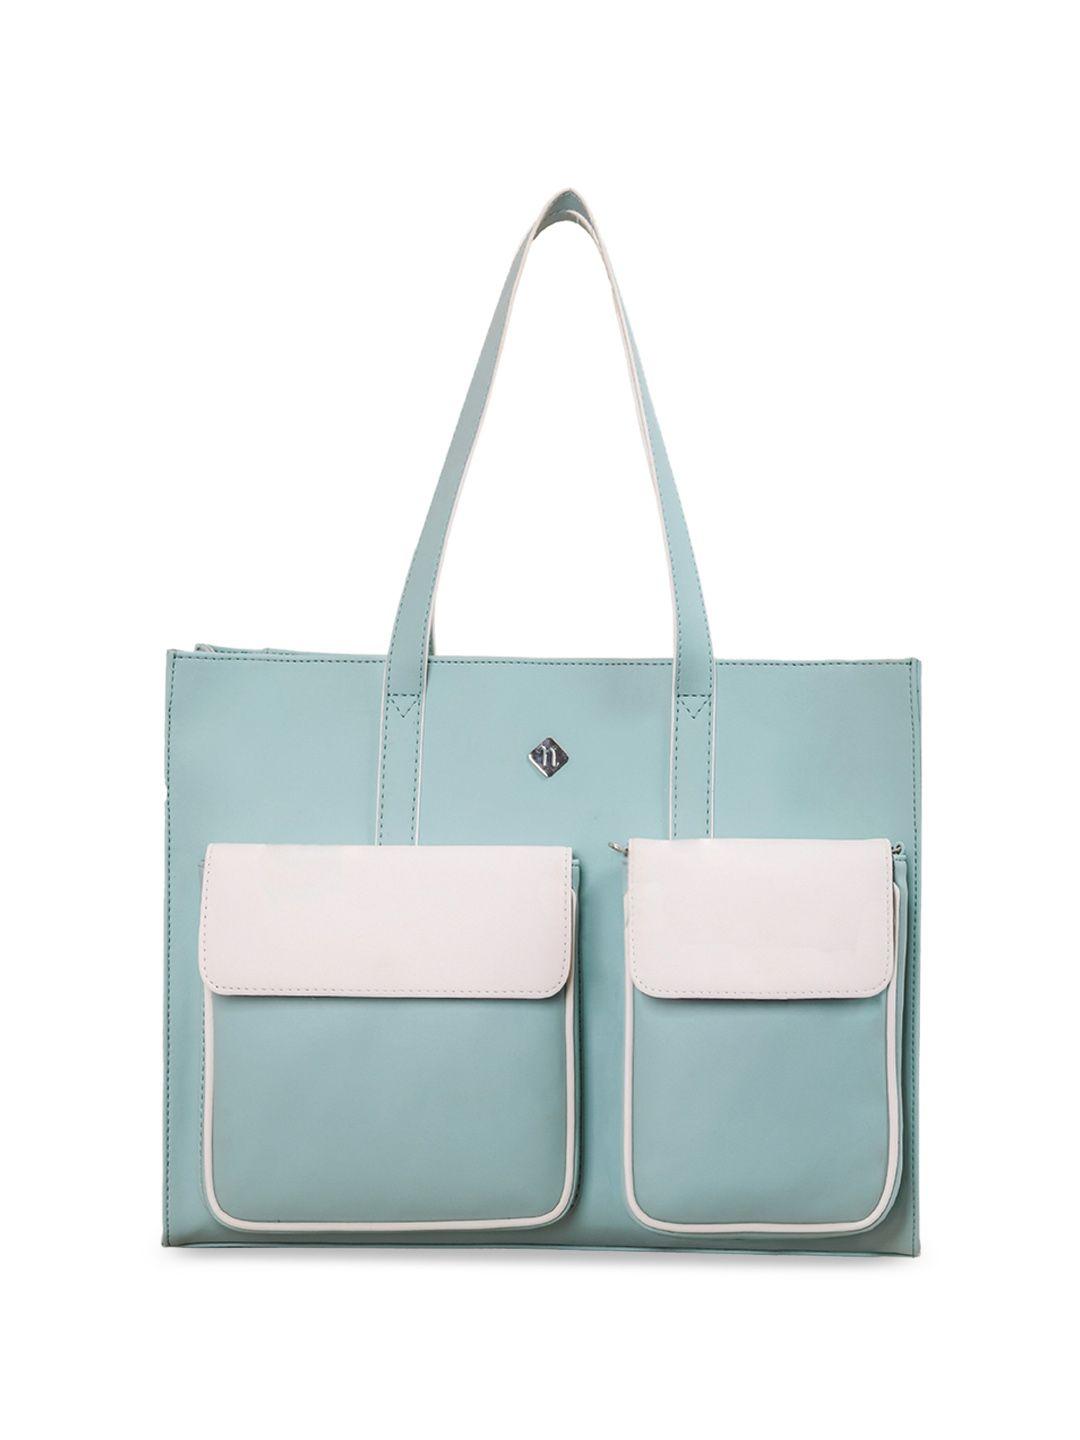 nestasia green textured structured tote bag